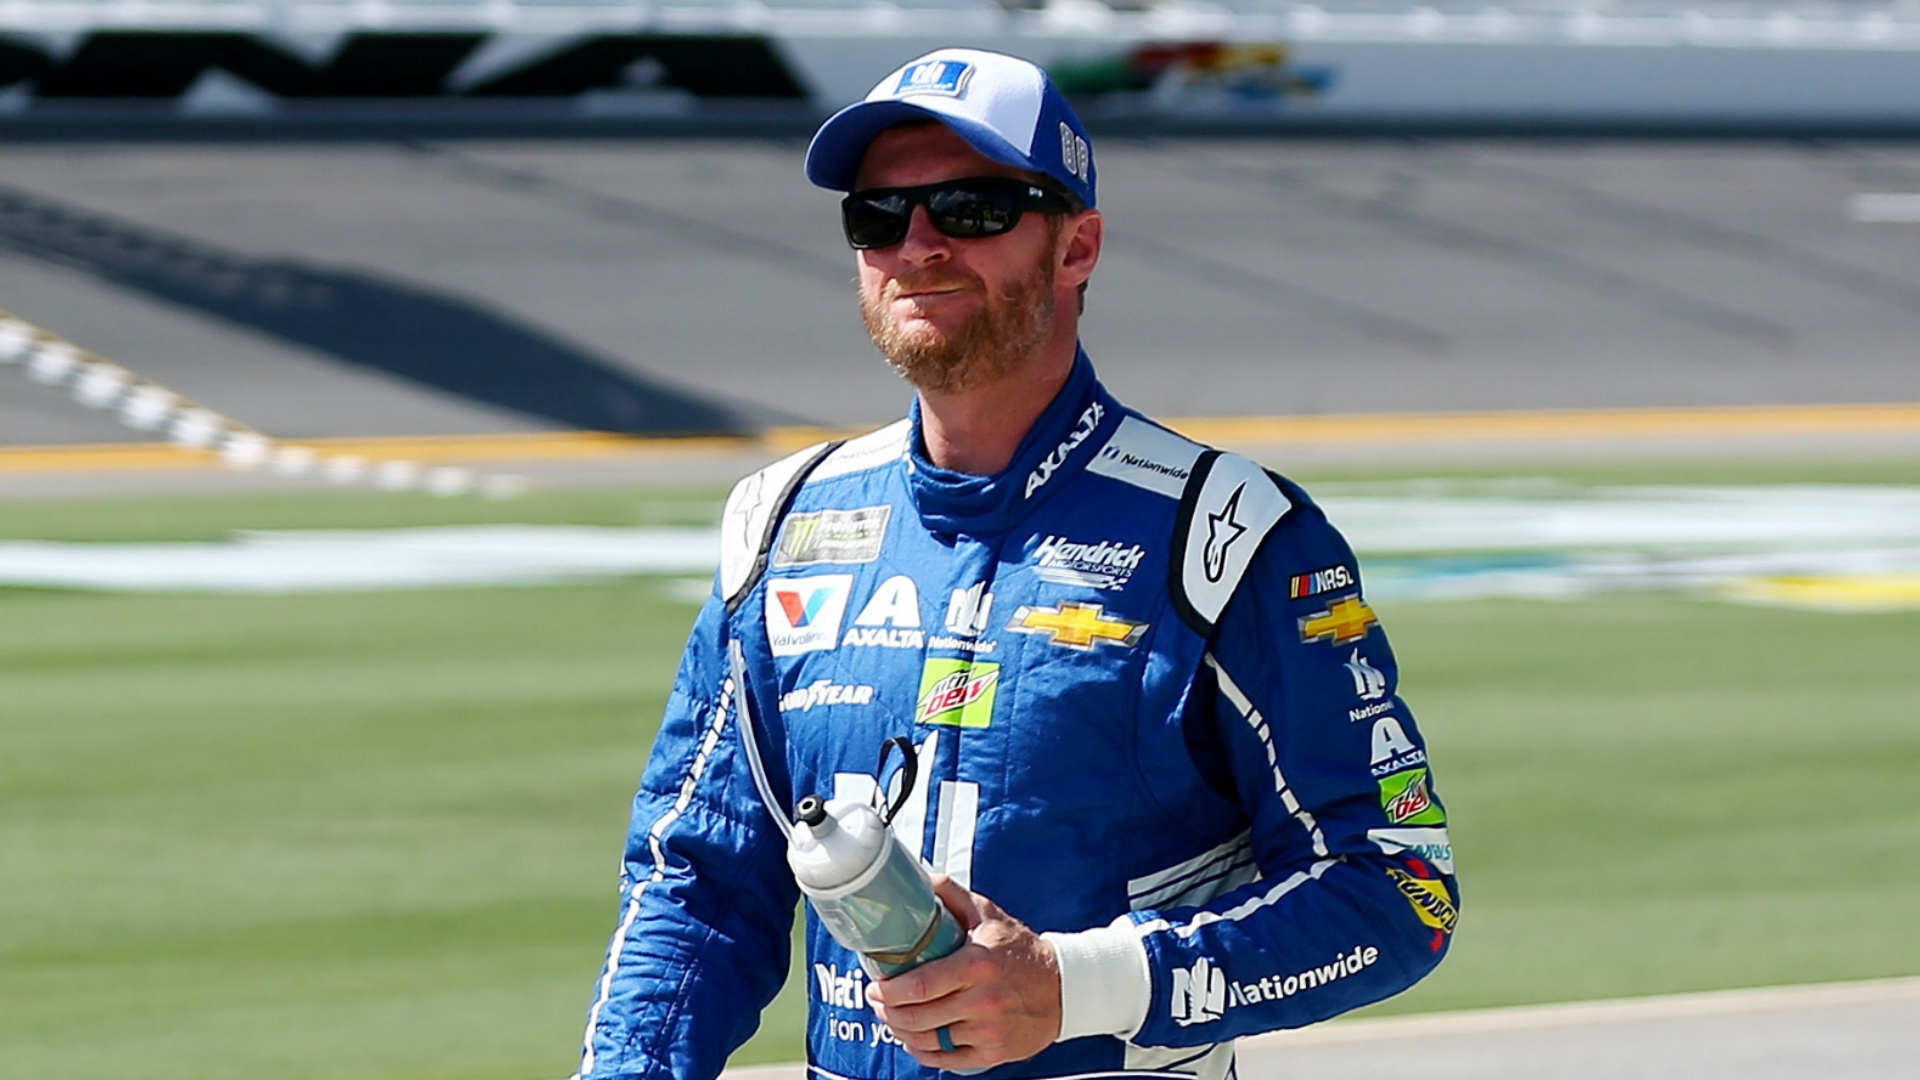 Dale Earnhardt Jr. will be inducted into Texas Motorsports Hall of Fame